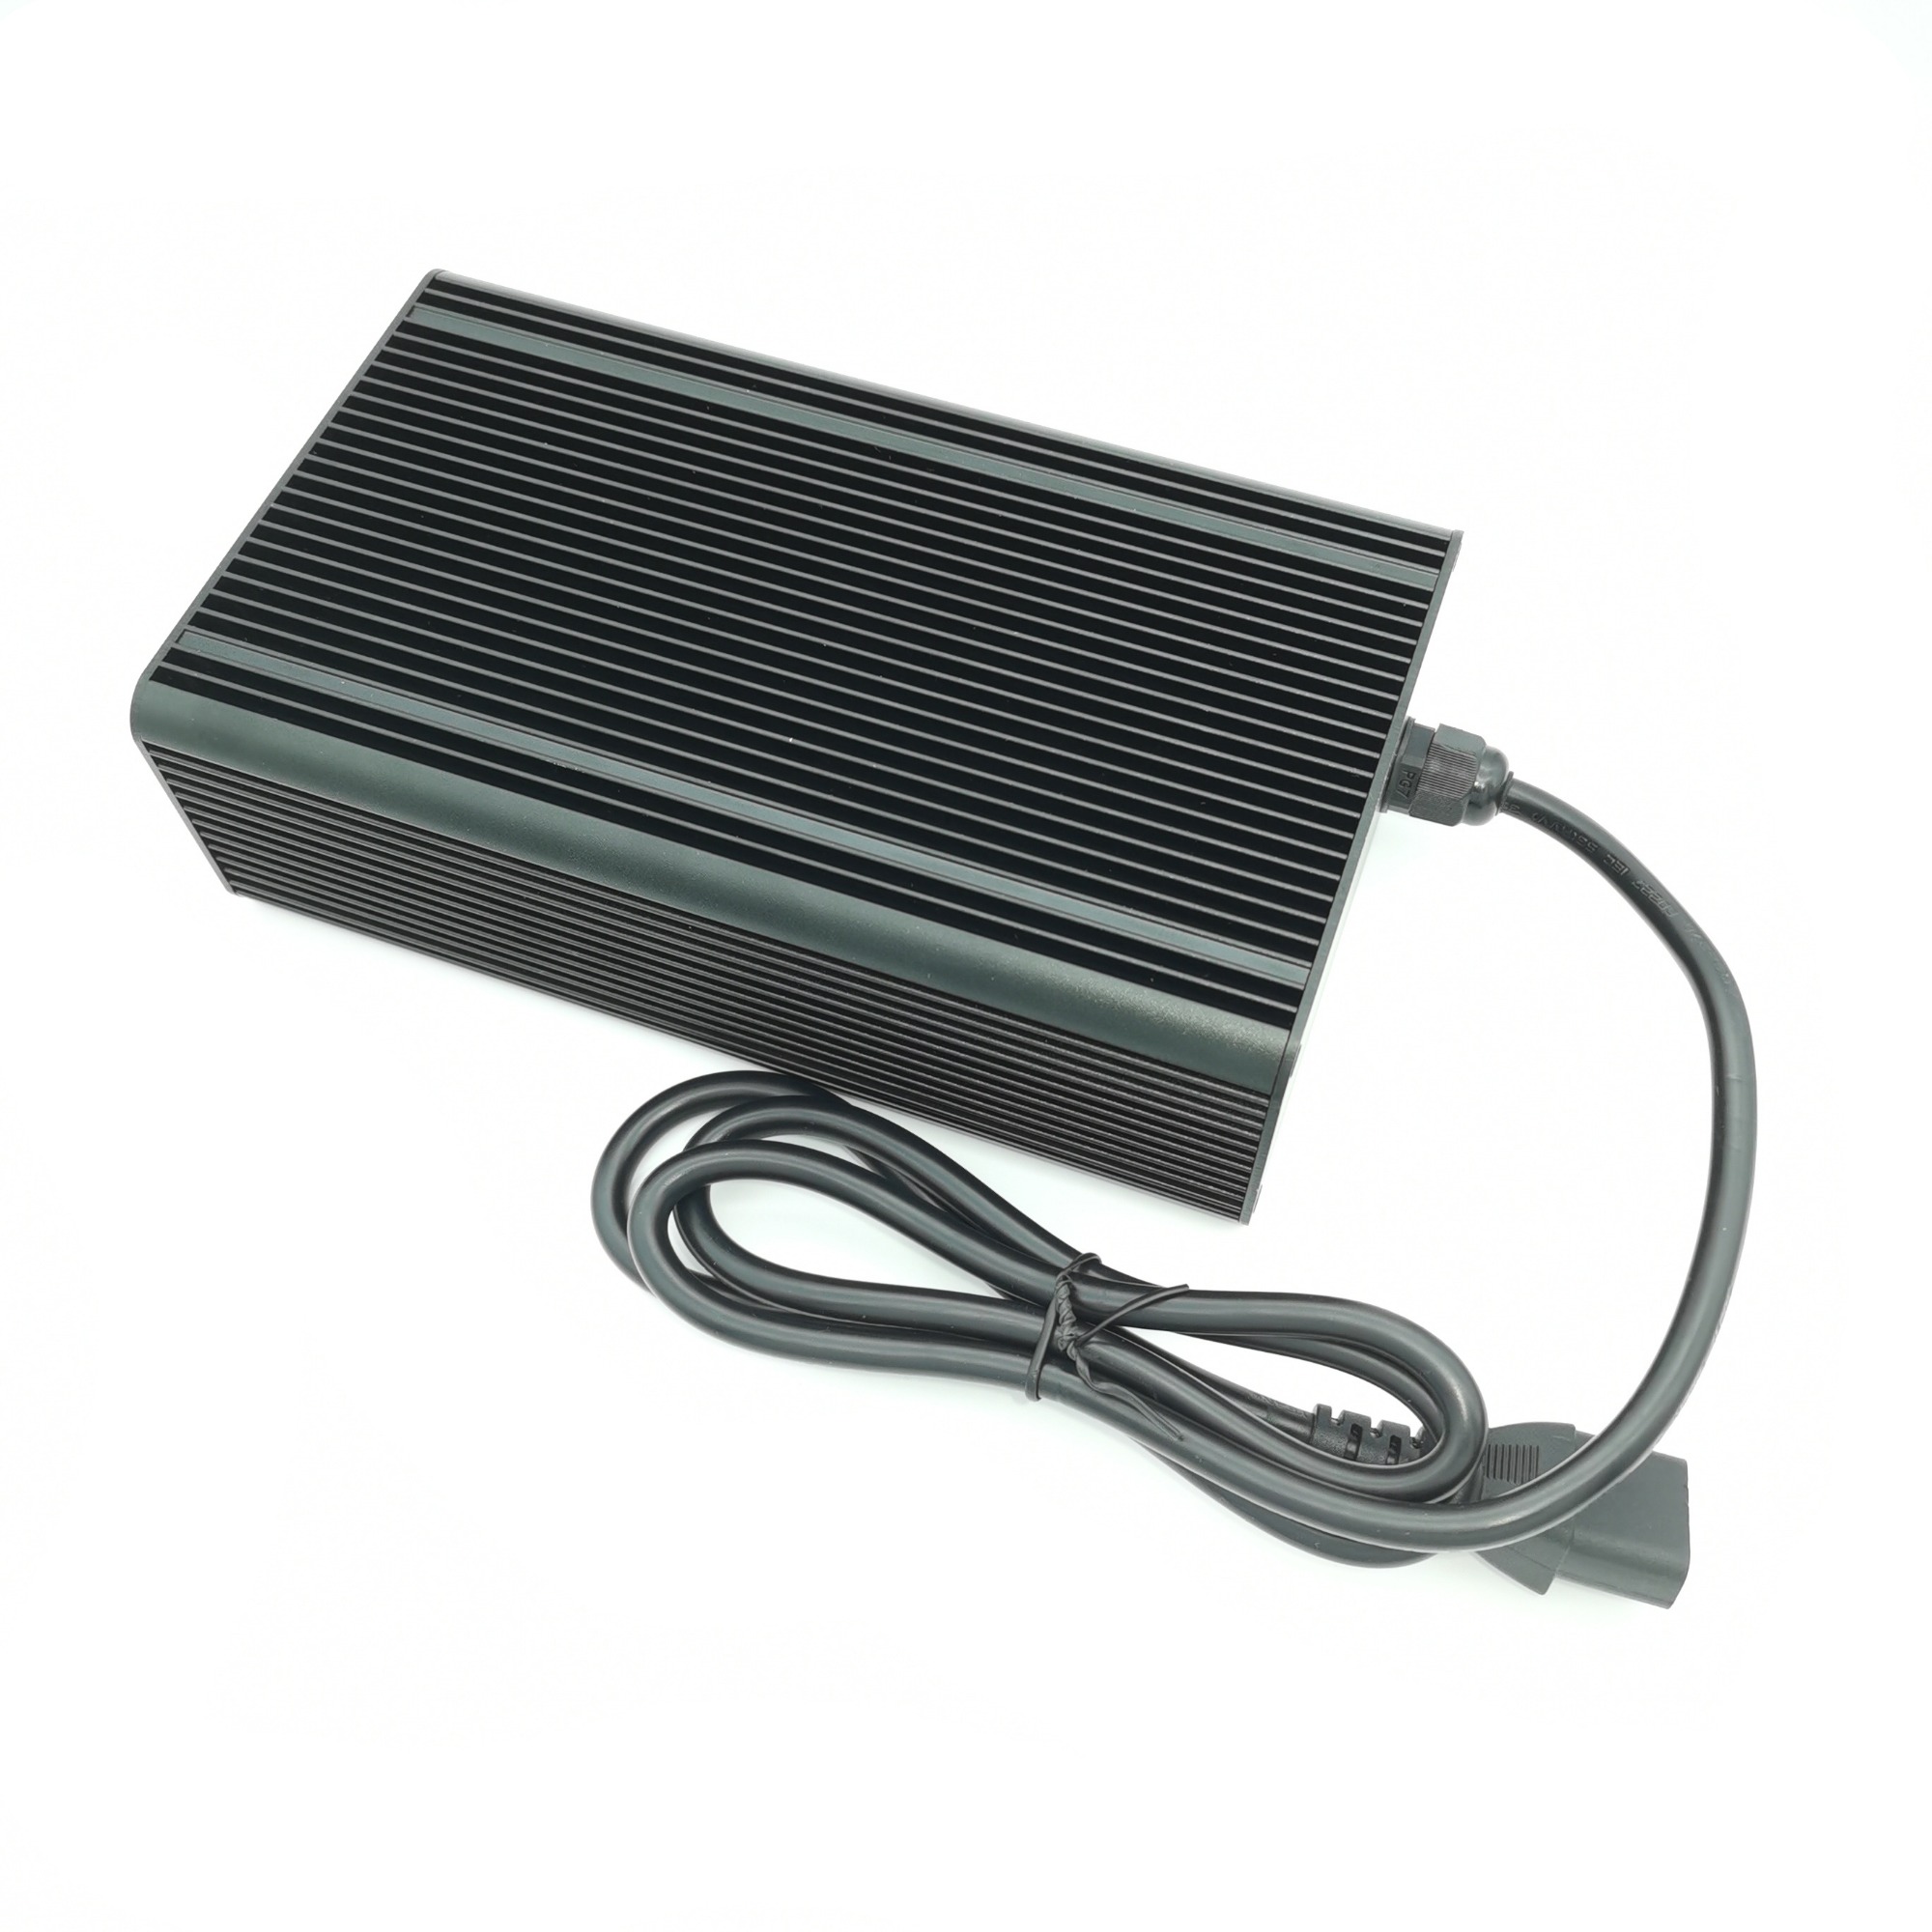 Smart 54.6V 6A lithium Battery Charger Dustproof type for 13S Li-ion battery charging